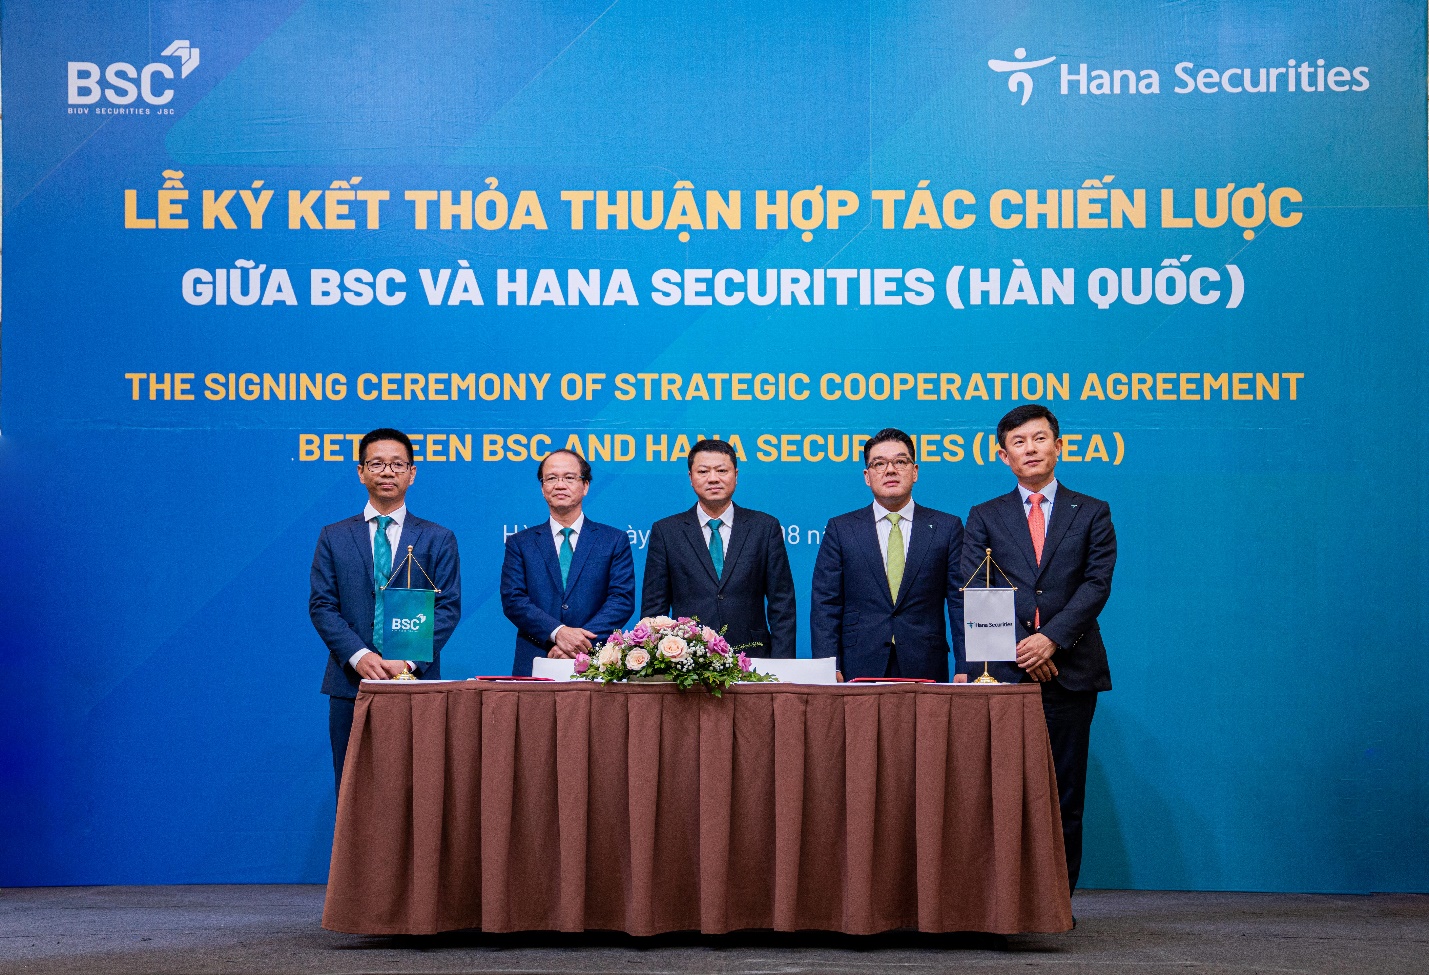 Key officials of Hana Securities and BSC at the Signing Ceremony